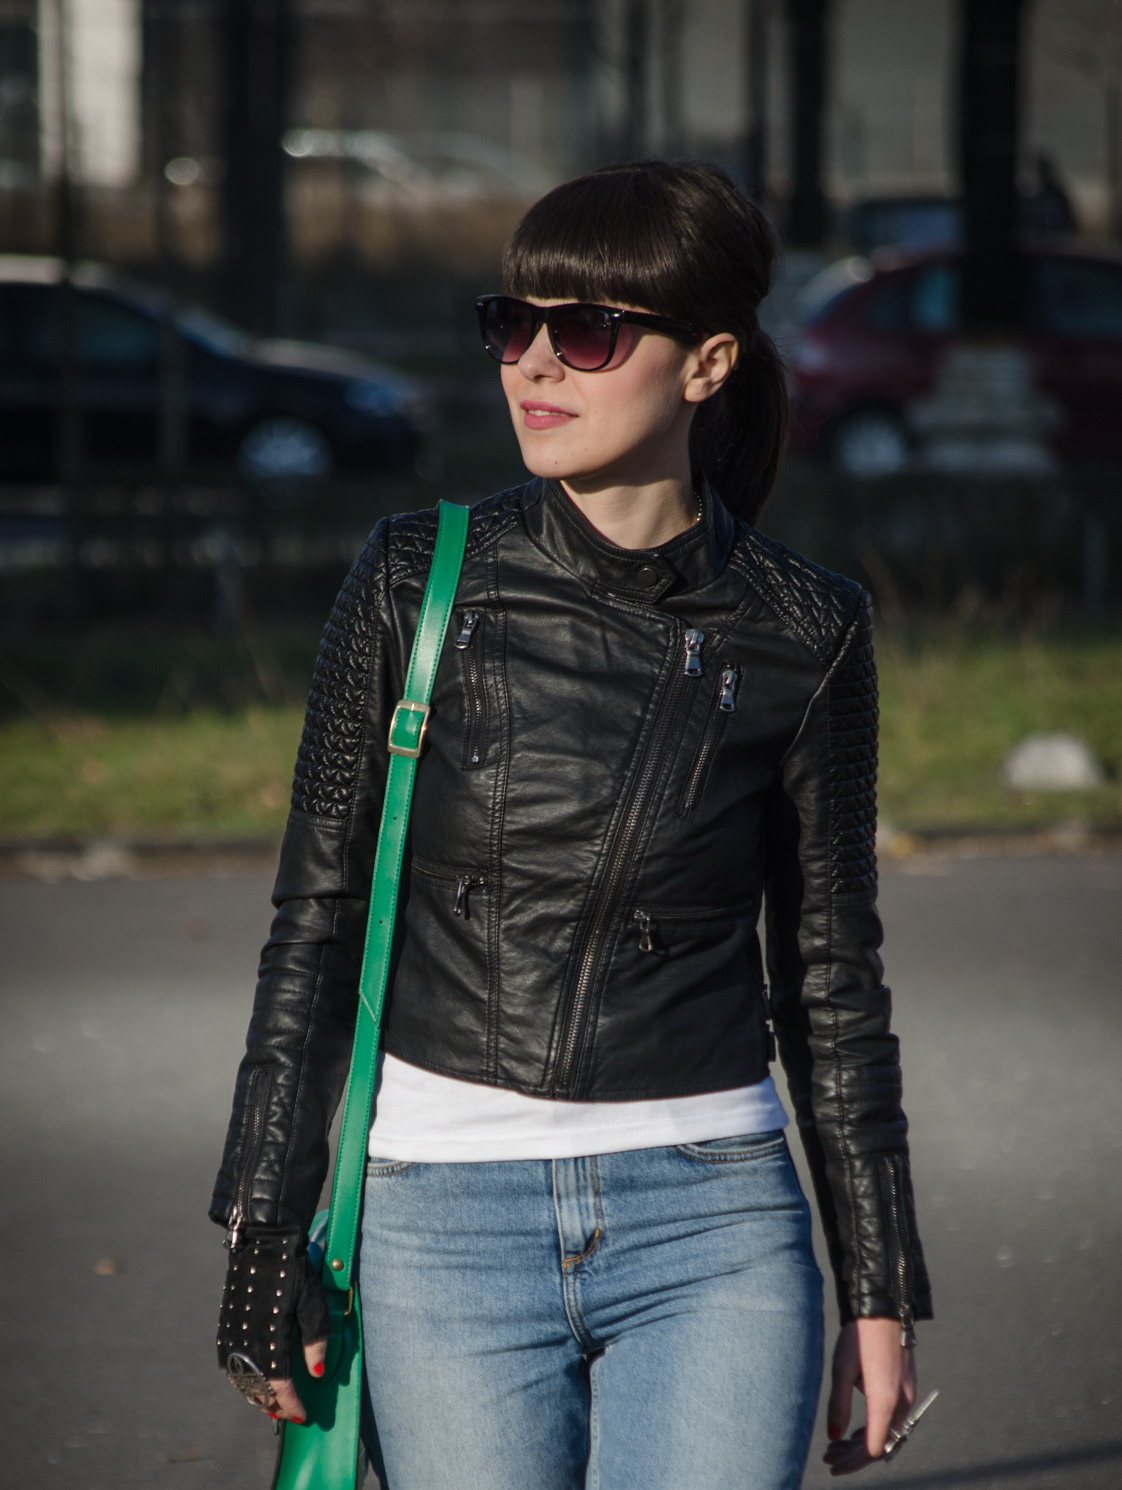 leather jacket new yorker green satchel bag tonka jeans mom jeans h&m worker camel boots romanian producer green white sheinside top bangs rocking rocker coca-cola dog tag